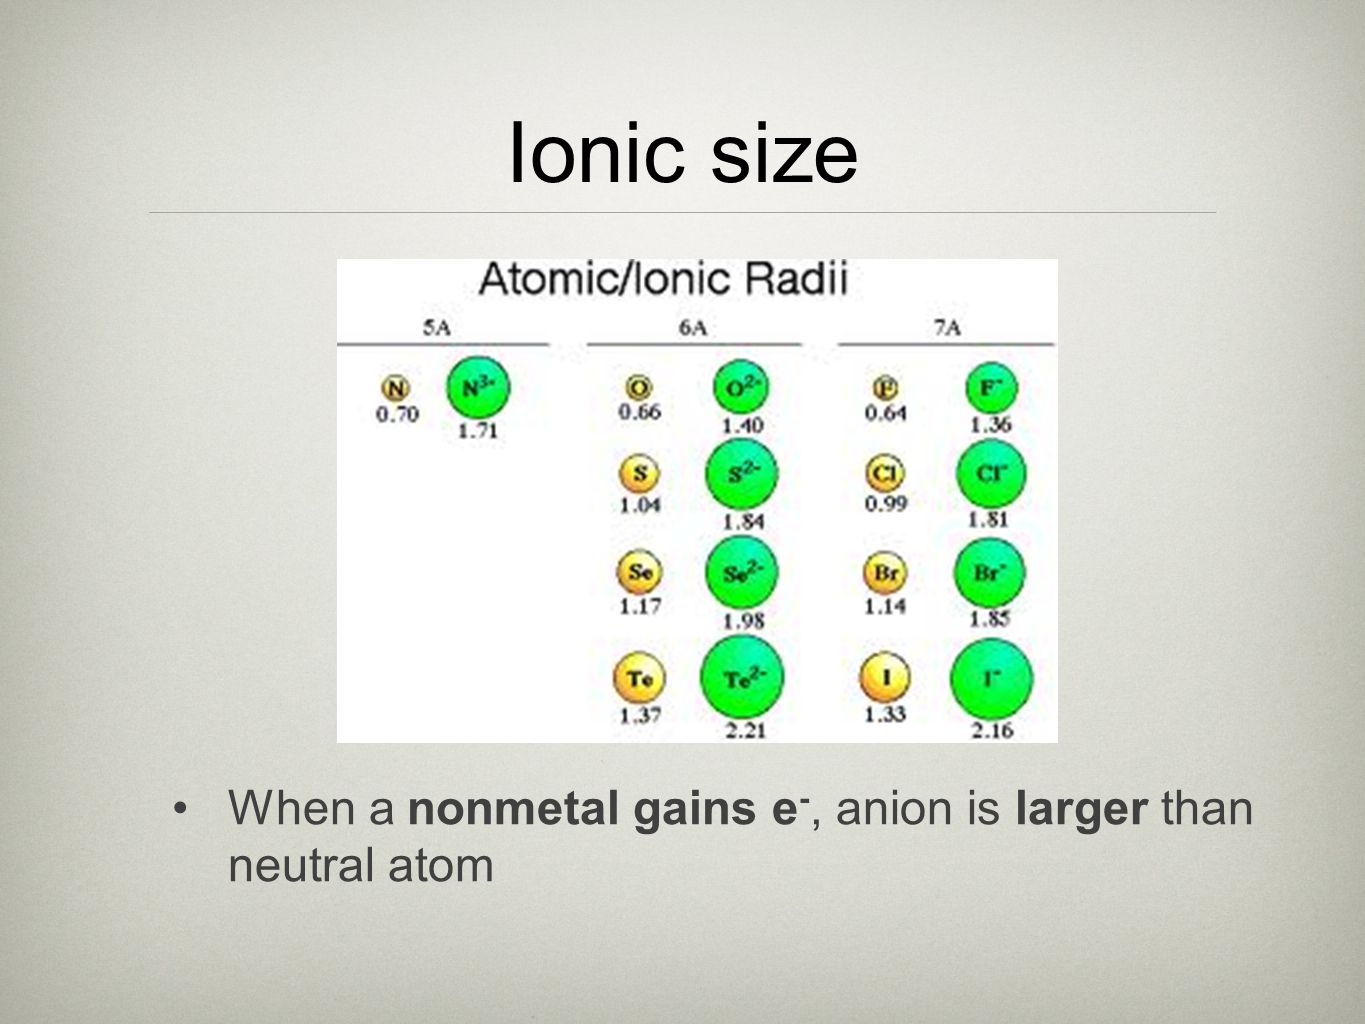 Ionic size When a nonmetal gains e-, anion is larger than neutral atom